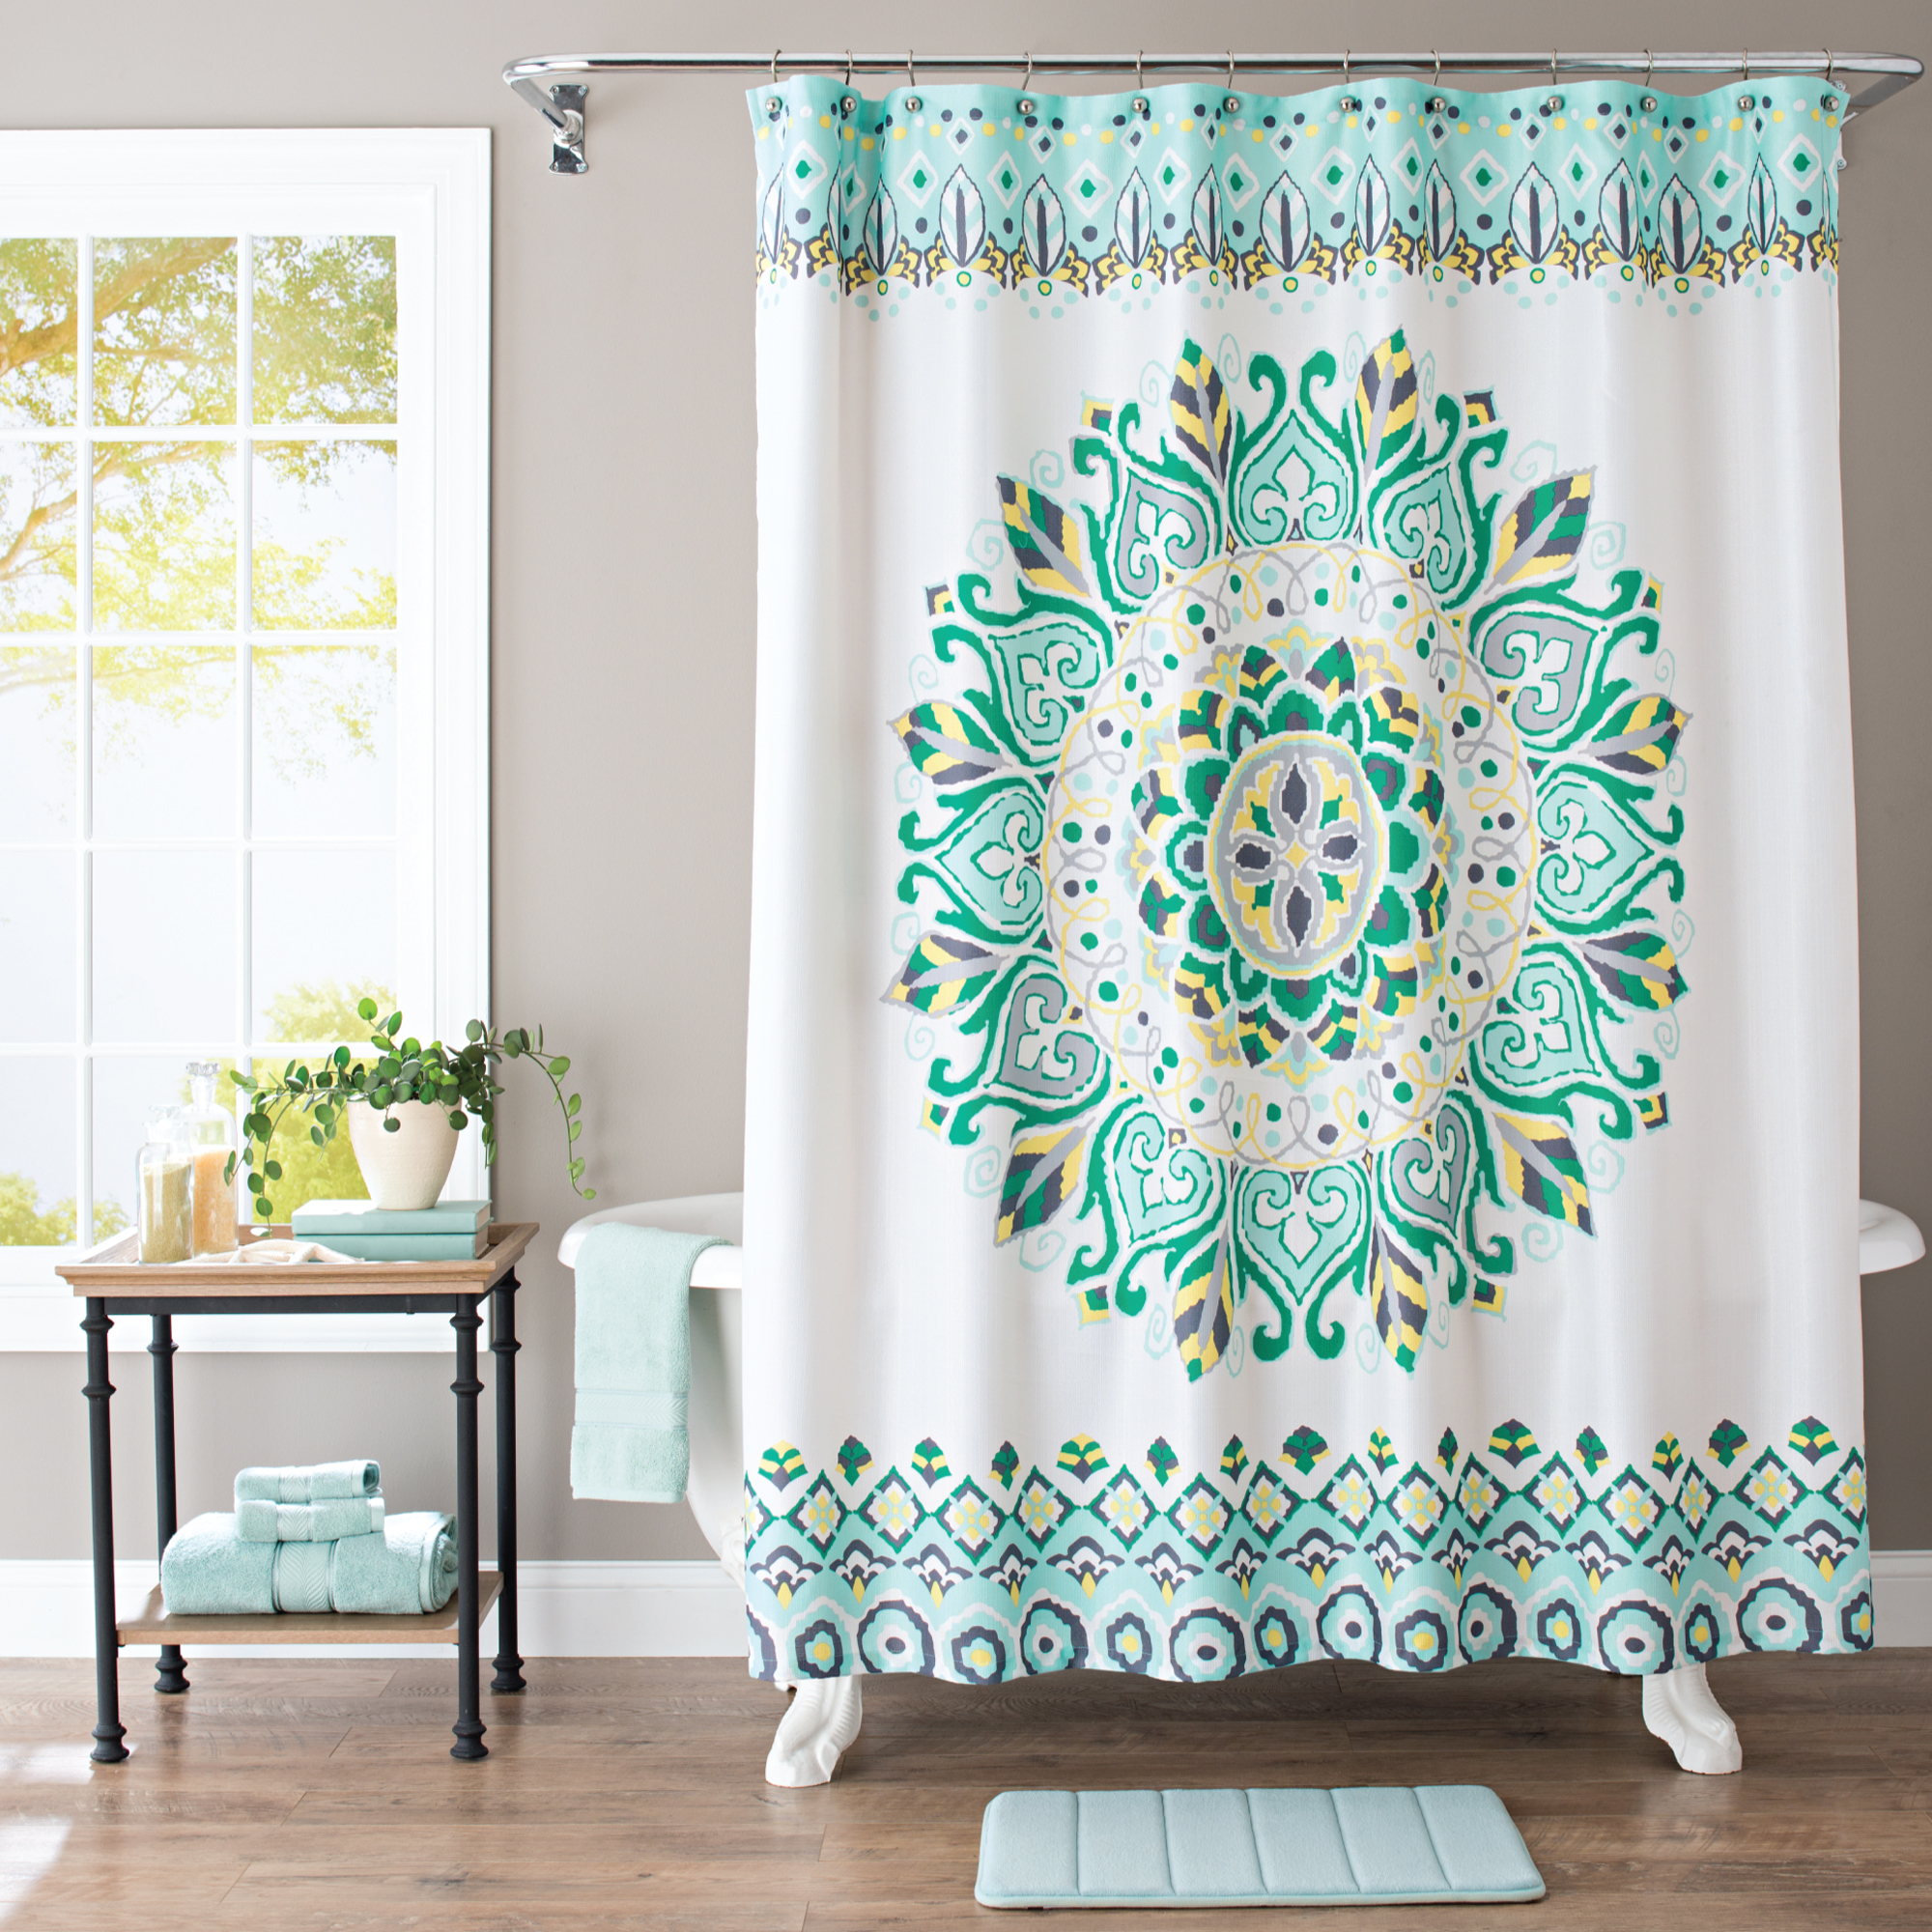 Multicolor Fabric Shower Curtain, 72" x 72", Better Homes & Gardens Medallion Pattern - image 1 of 5